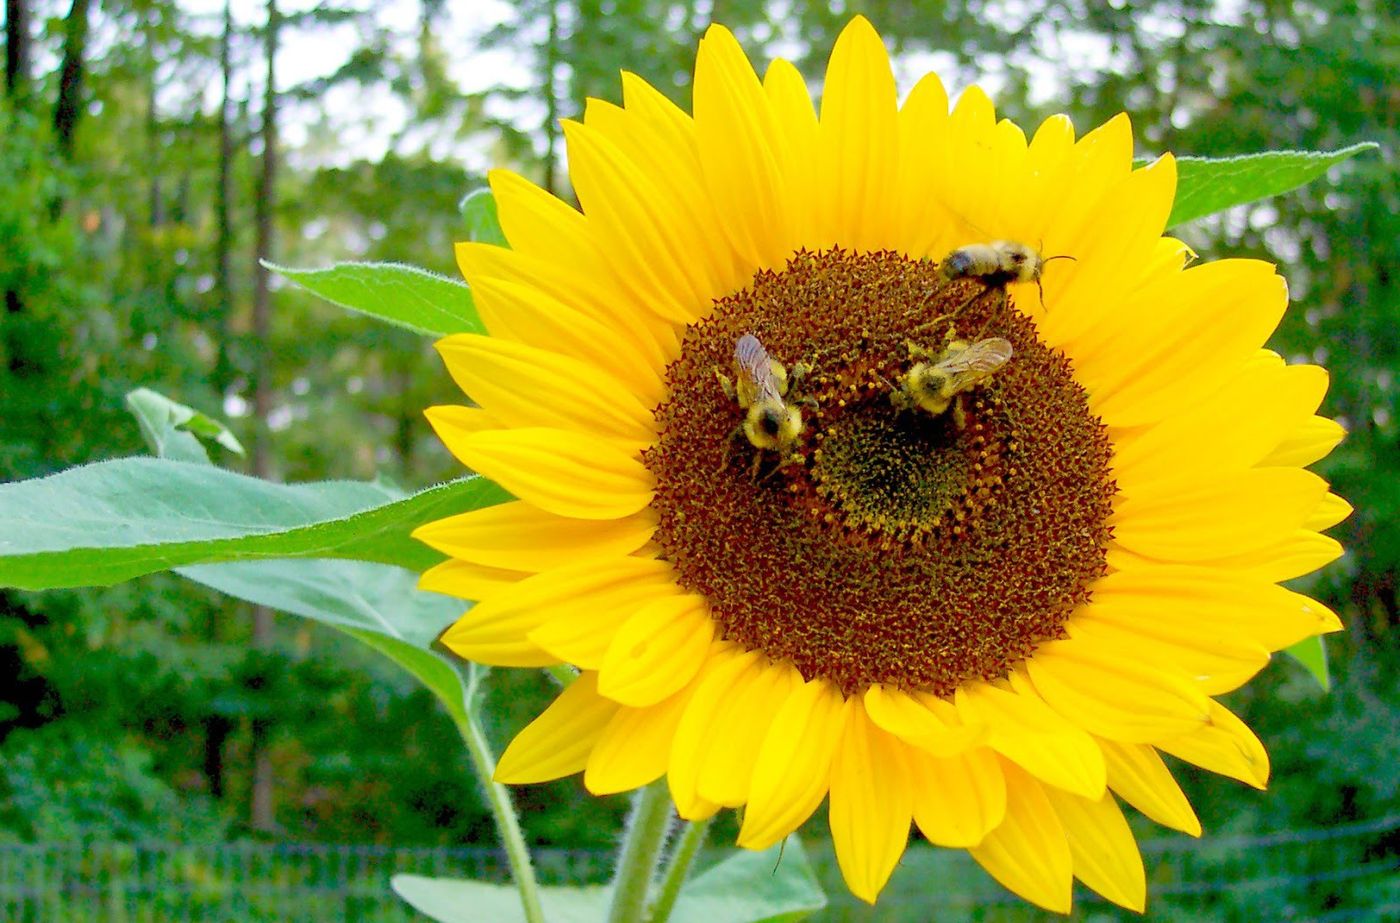 Sunflowers have internal circadian clocks that help them grow and reproduce.